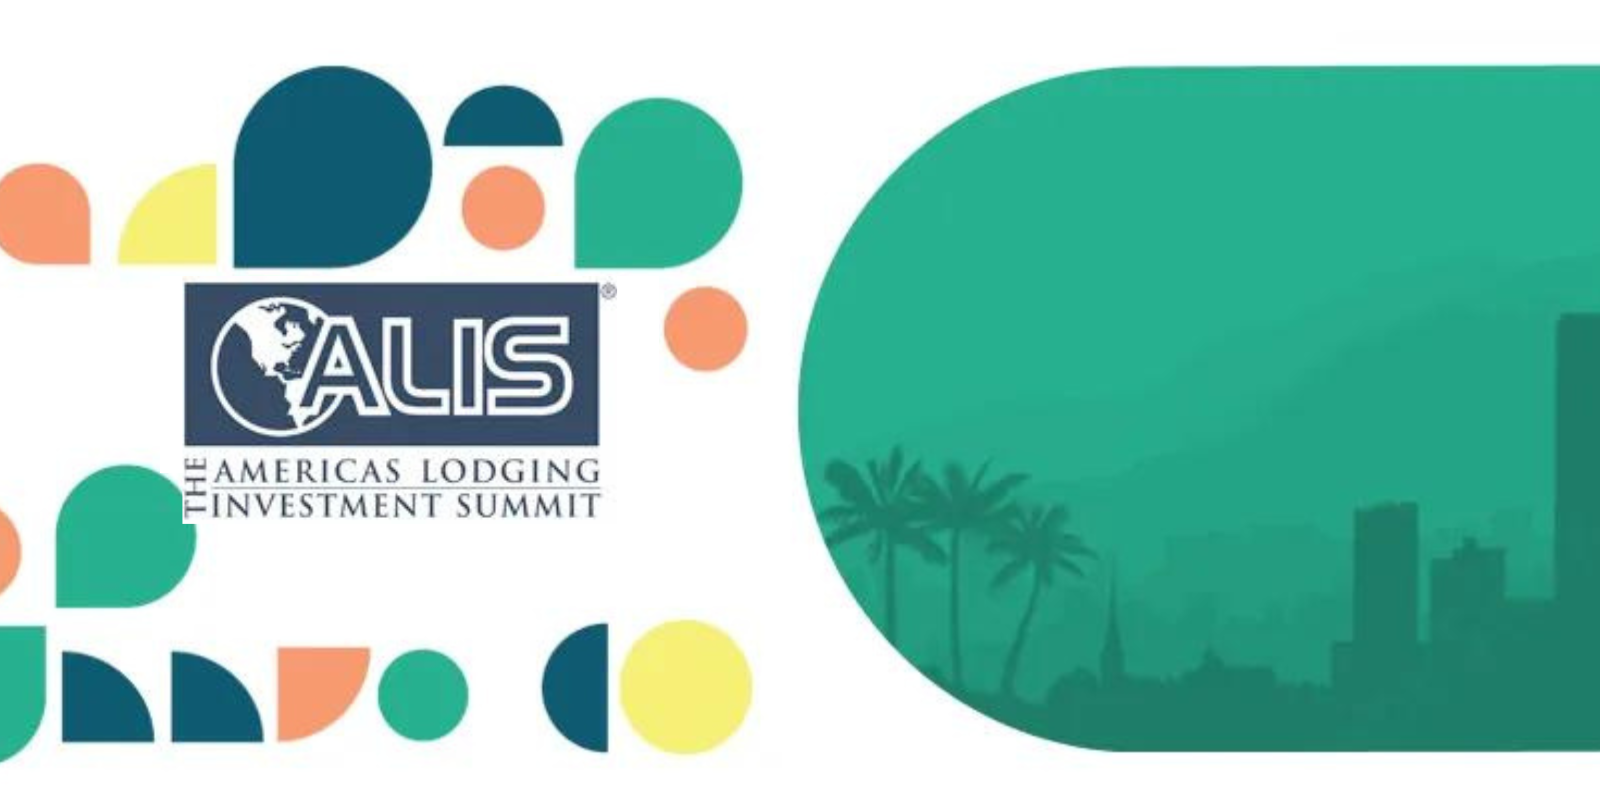 a logo for the calis americas lodging investment summit